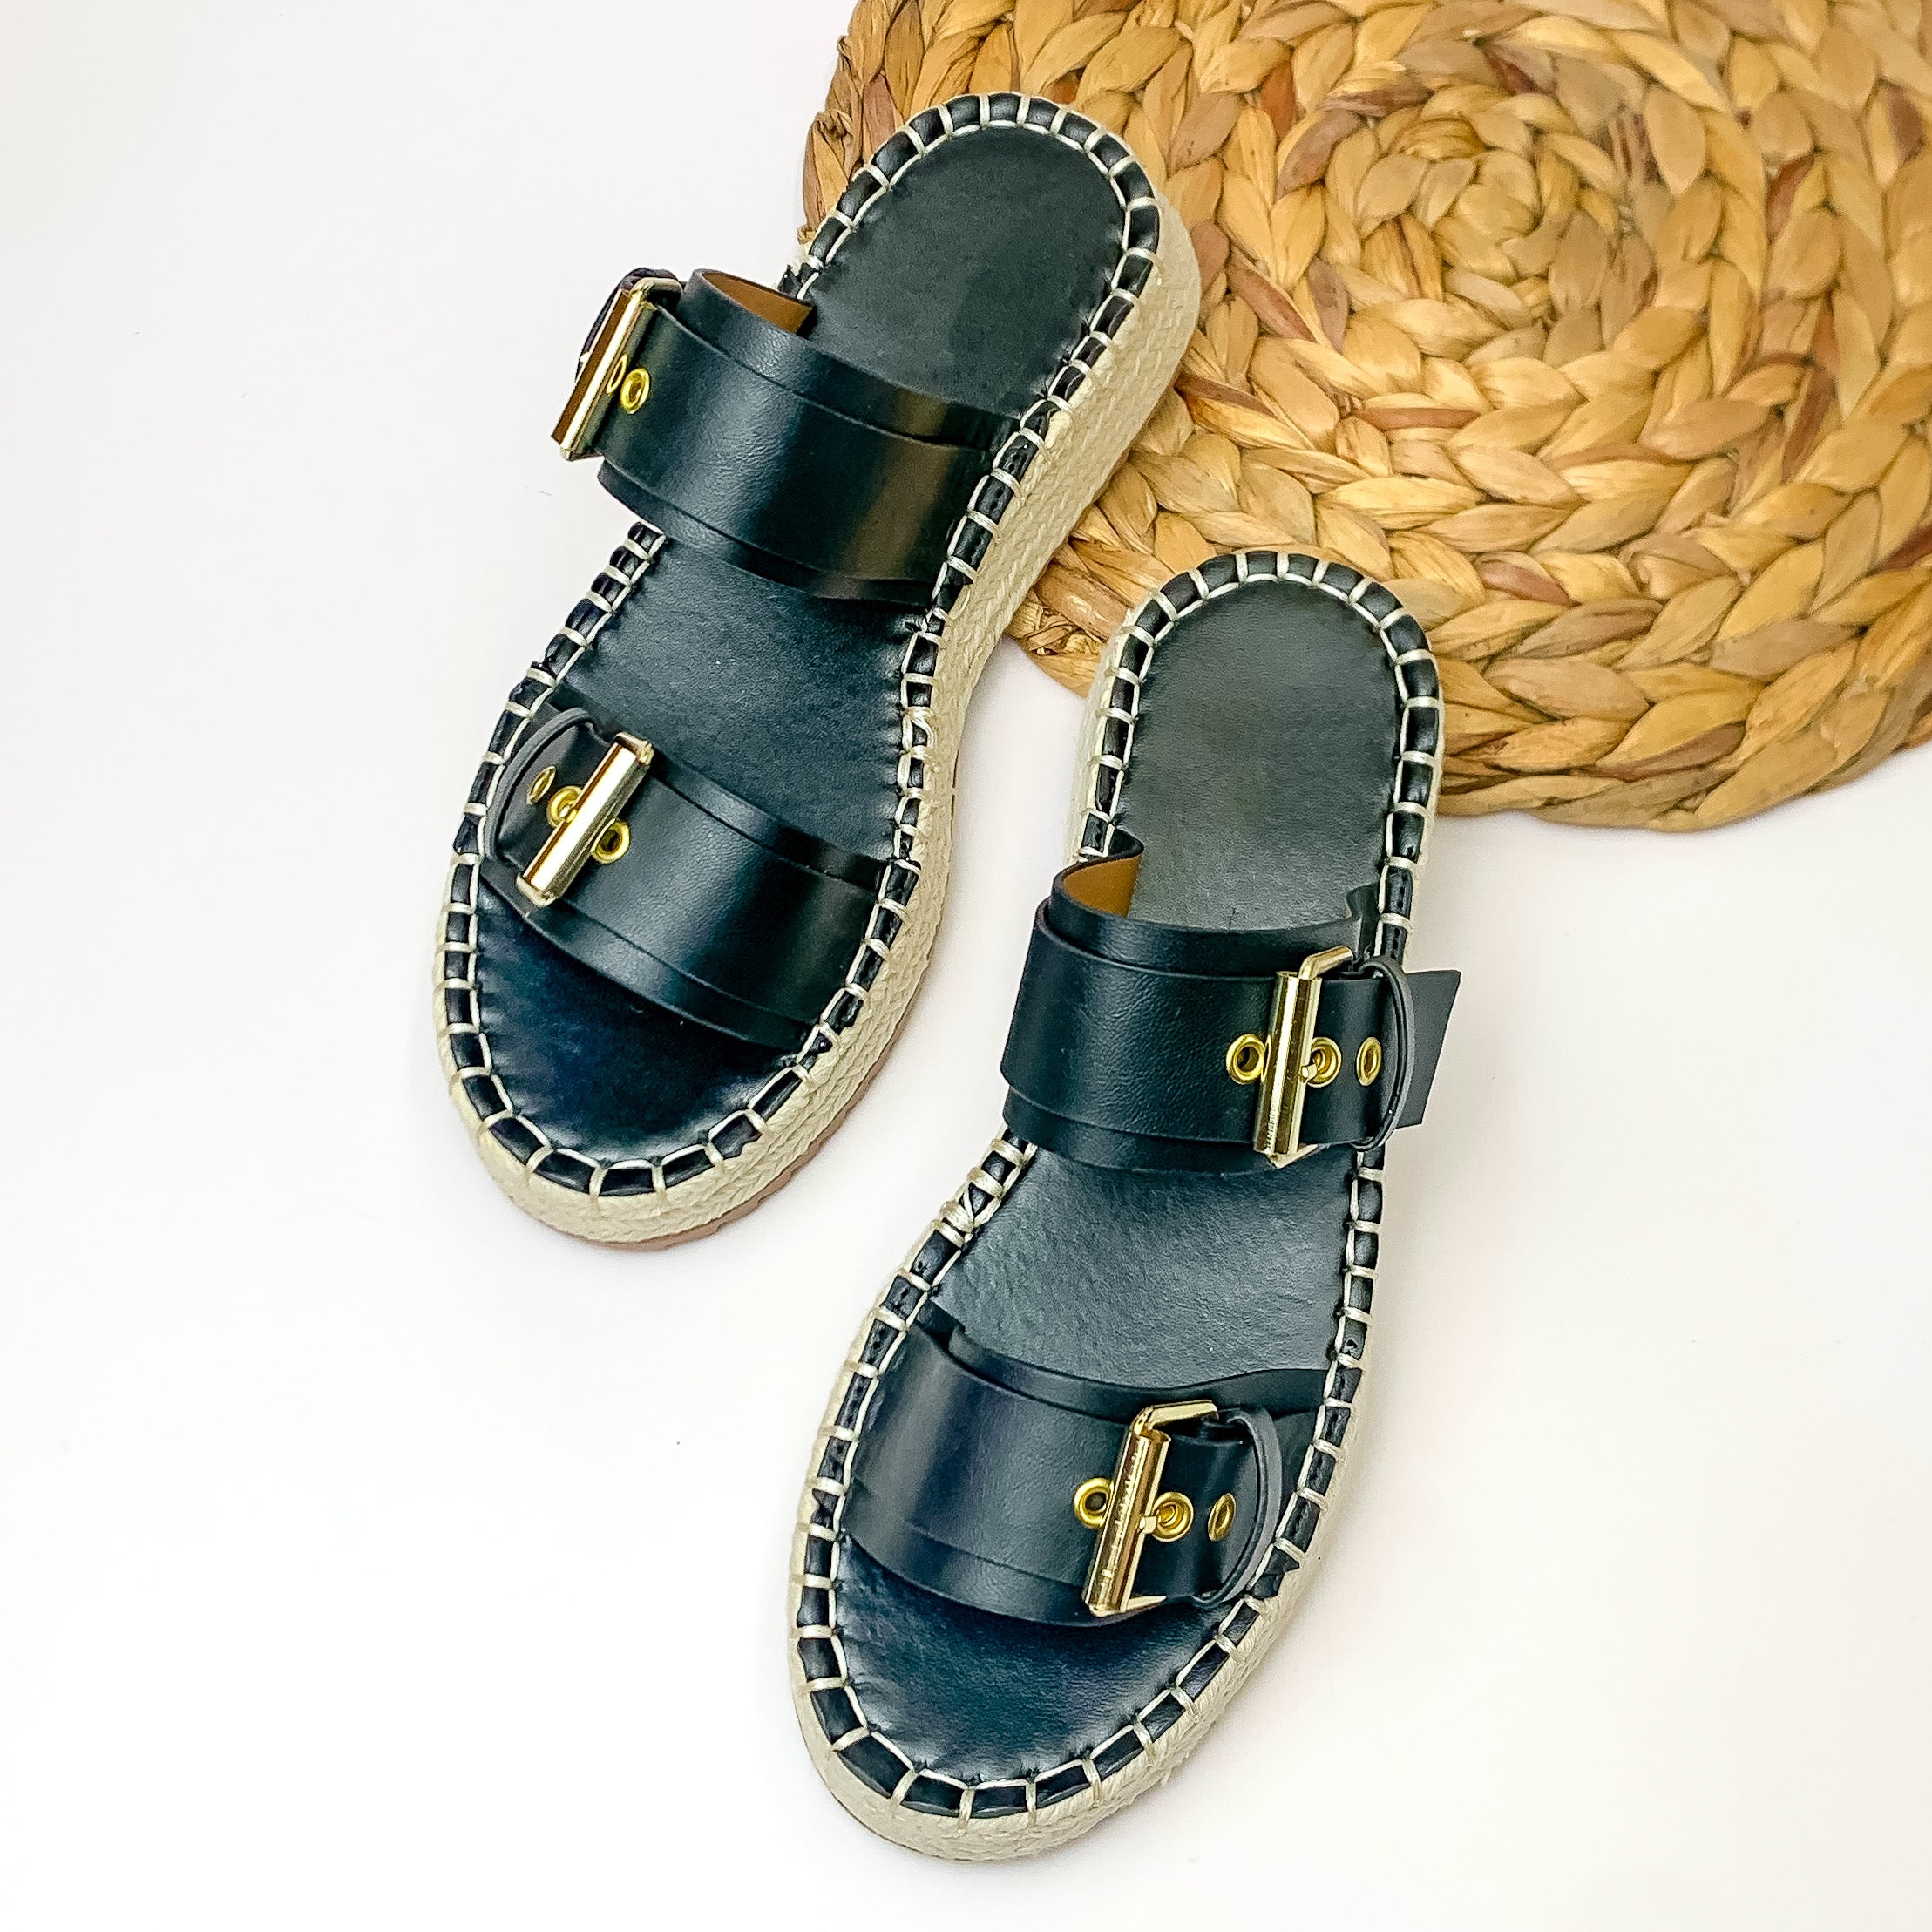 Yacht Trip Two Strap Slide On Espadrille Platform Sandals with Gold Buckles in Black - Giddy Up Glamour Boutique